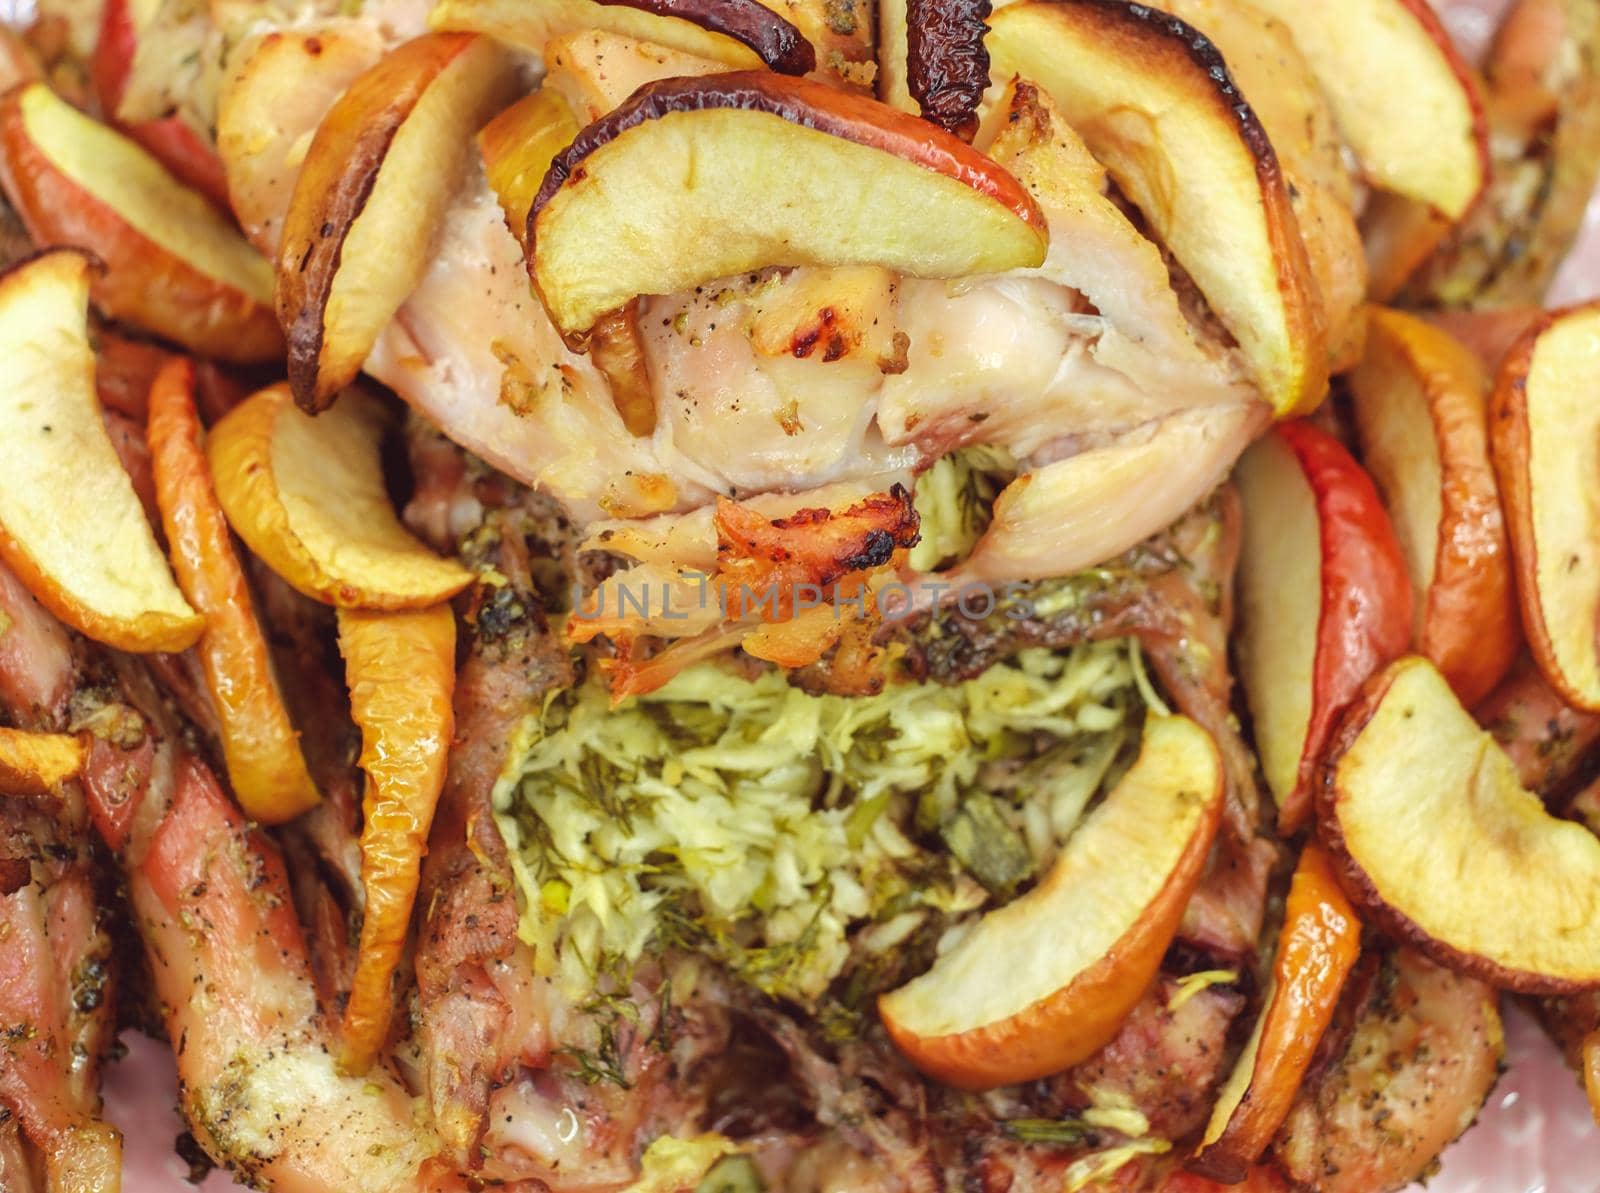 baked chicken with fruits and vegetables by Roberto